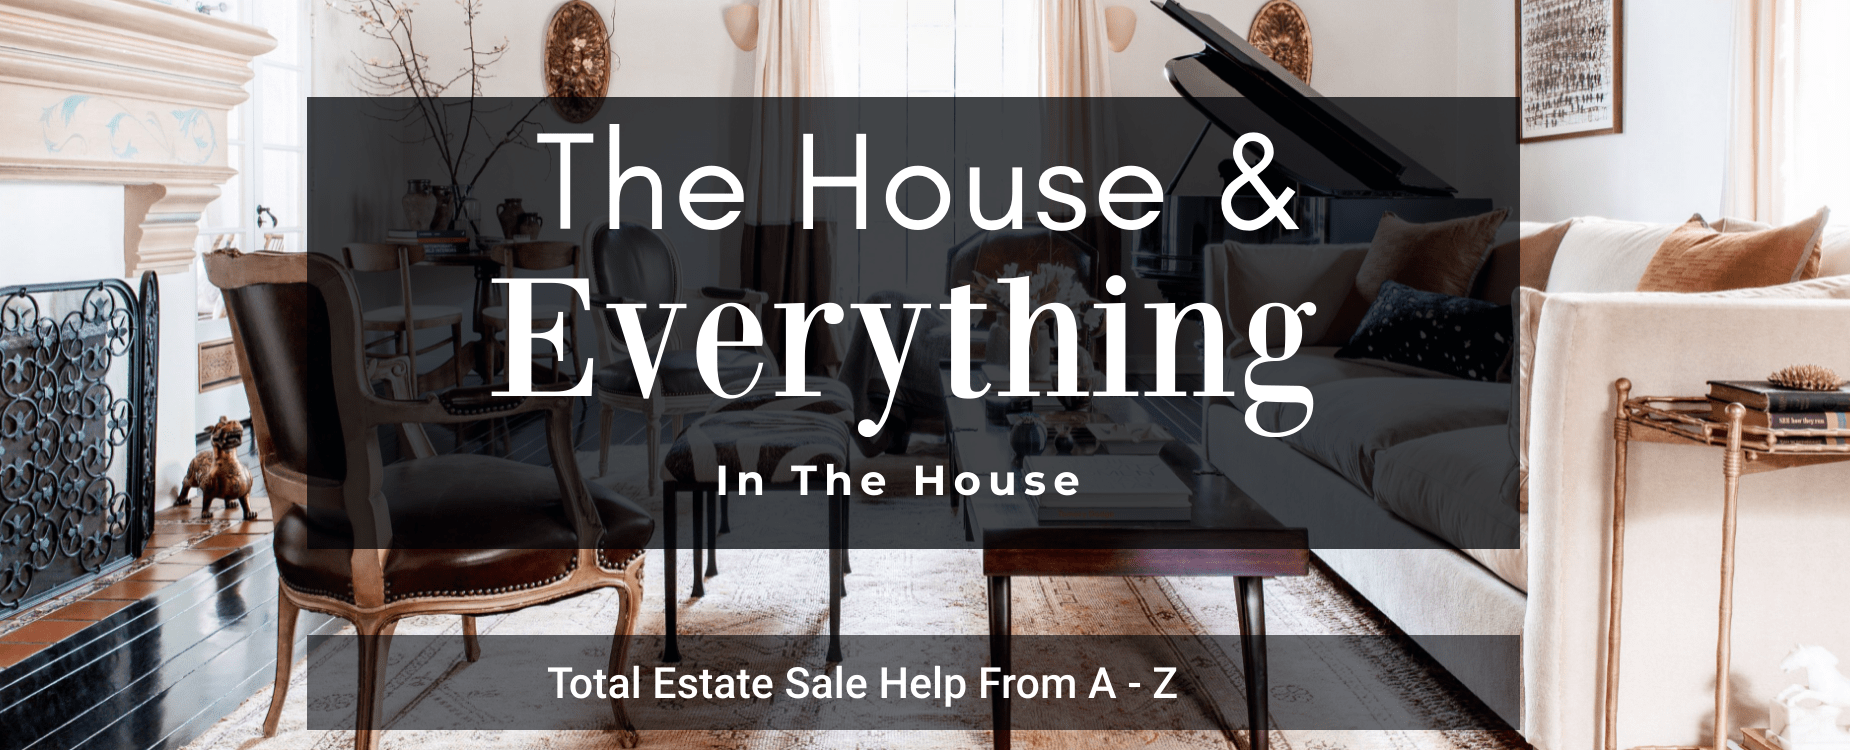 How-to-hire-an-estate-sale-company